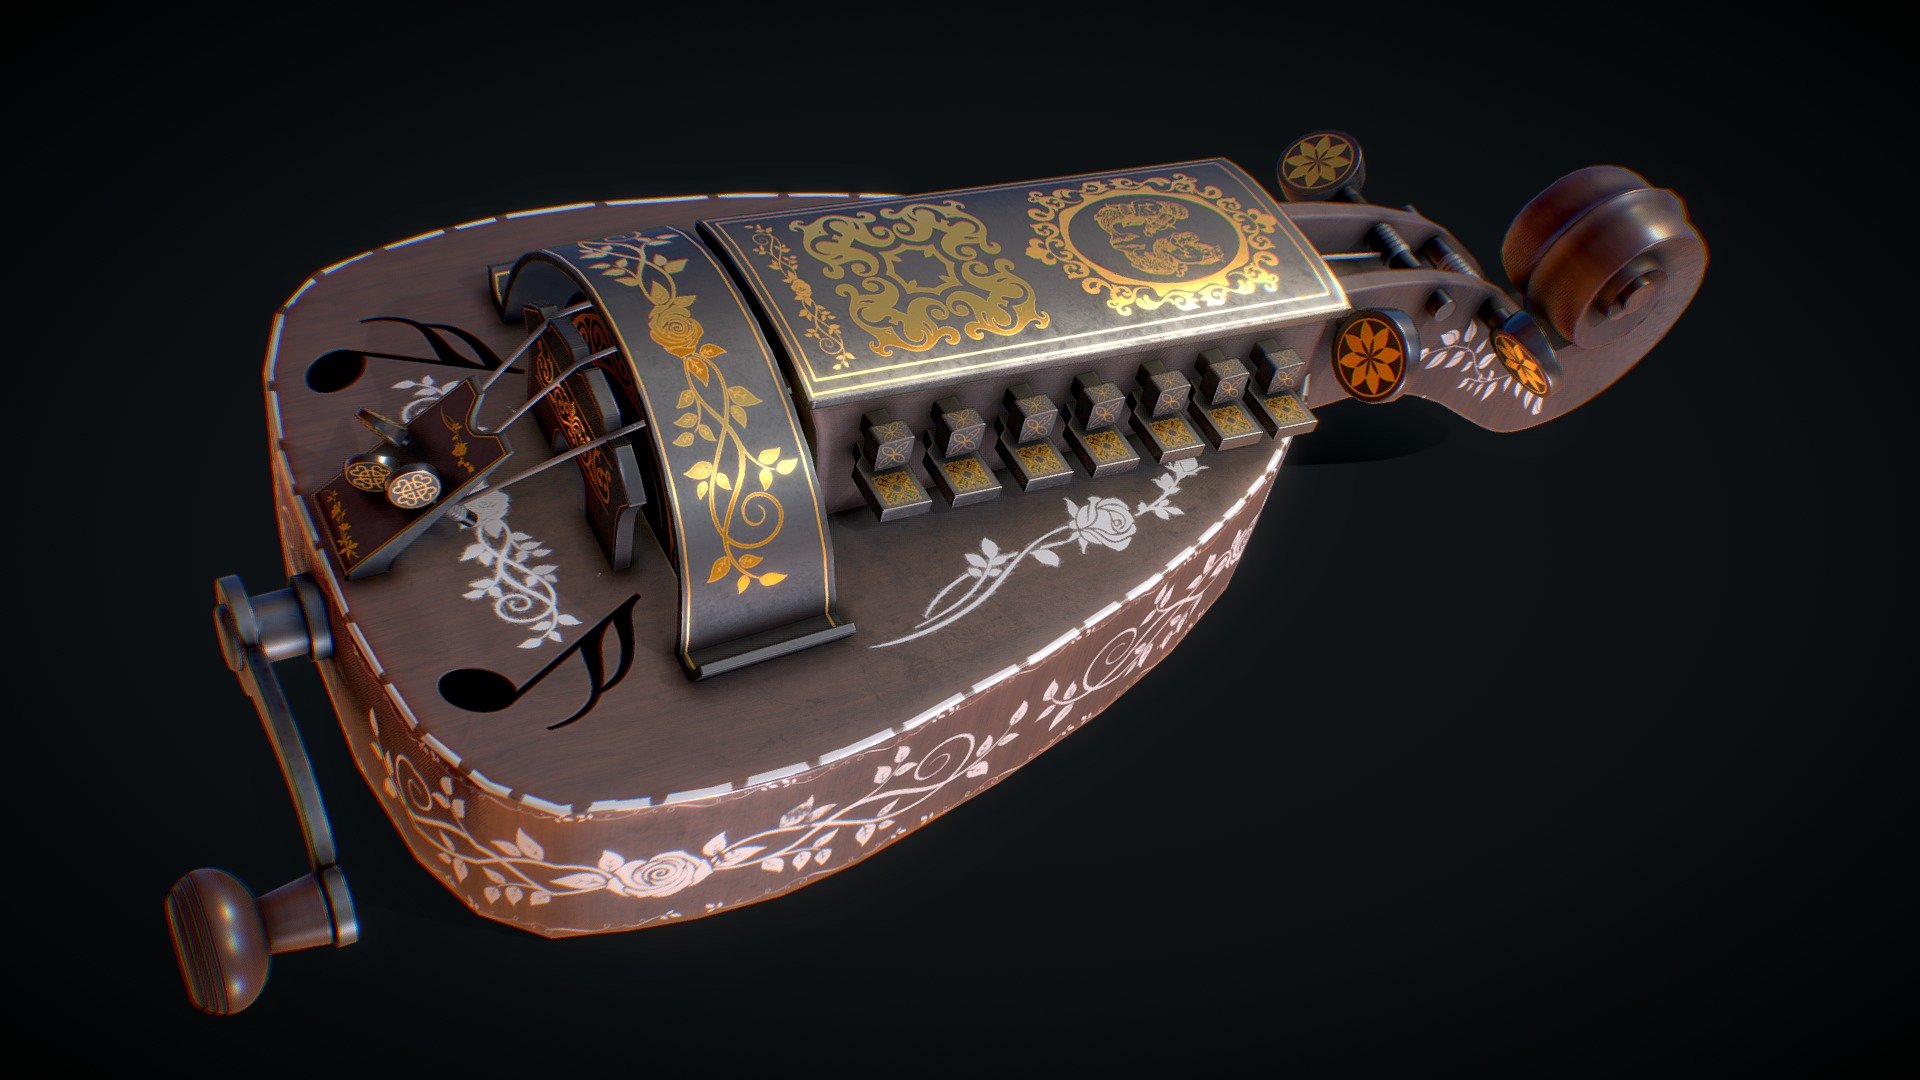 A Hurdy-Gurdy Or Wheel Fiddle Is a stringed instrument that produces sound by hand-crank With a the Wheel acting as Bow was believed to have been created around the 11th century and one of the early forms of organistrum. I loved the overall aesthetic of the instrument and attempted to re-create one!. 

Tools used:
-Substance Painter 2019
- 3dsmax
- Photoshop

Links to Historical origin:
https://en.wikipedia.org/wiki/Hurdy-gurdy

http://caslabs.case.edu/medren/medieval-instruments/hurdy-gurdy-medieval/ - Hurdy-Gurdy - Download Free 3D model by Steven Janes (@Ebethrone) 3d model